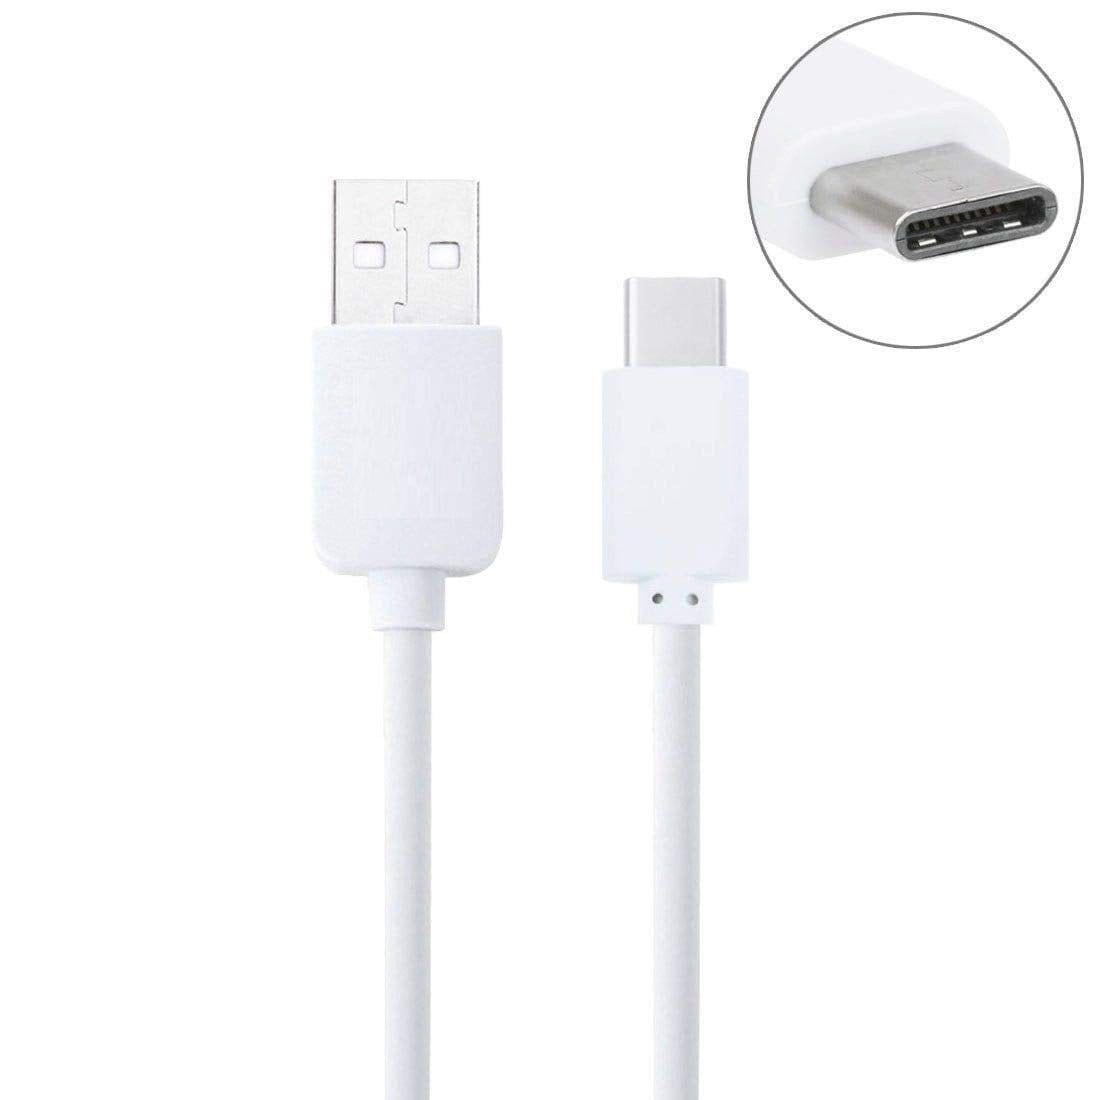 Samsung Galaxy S21 5G USB to Type C Charging Cable In Car White - 25 CM Short - SmartPhoneGadgetUK